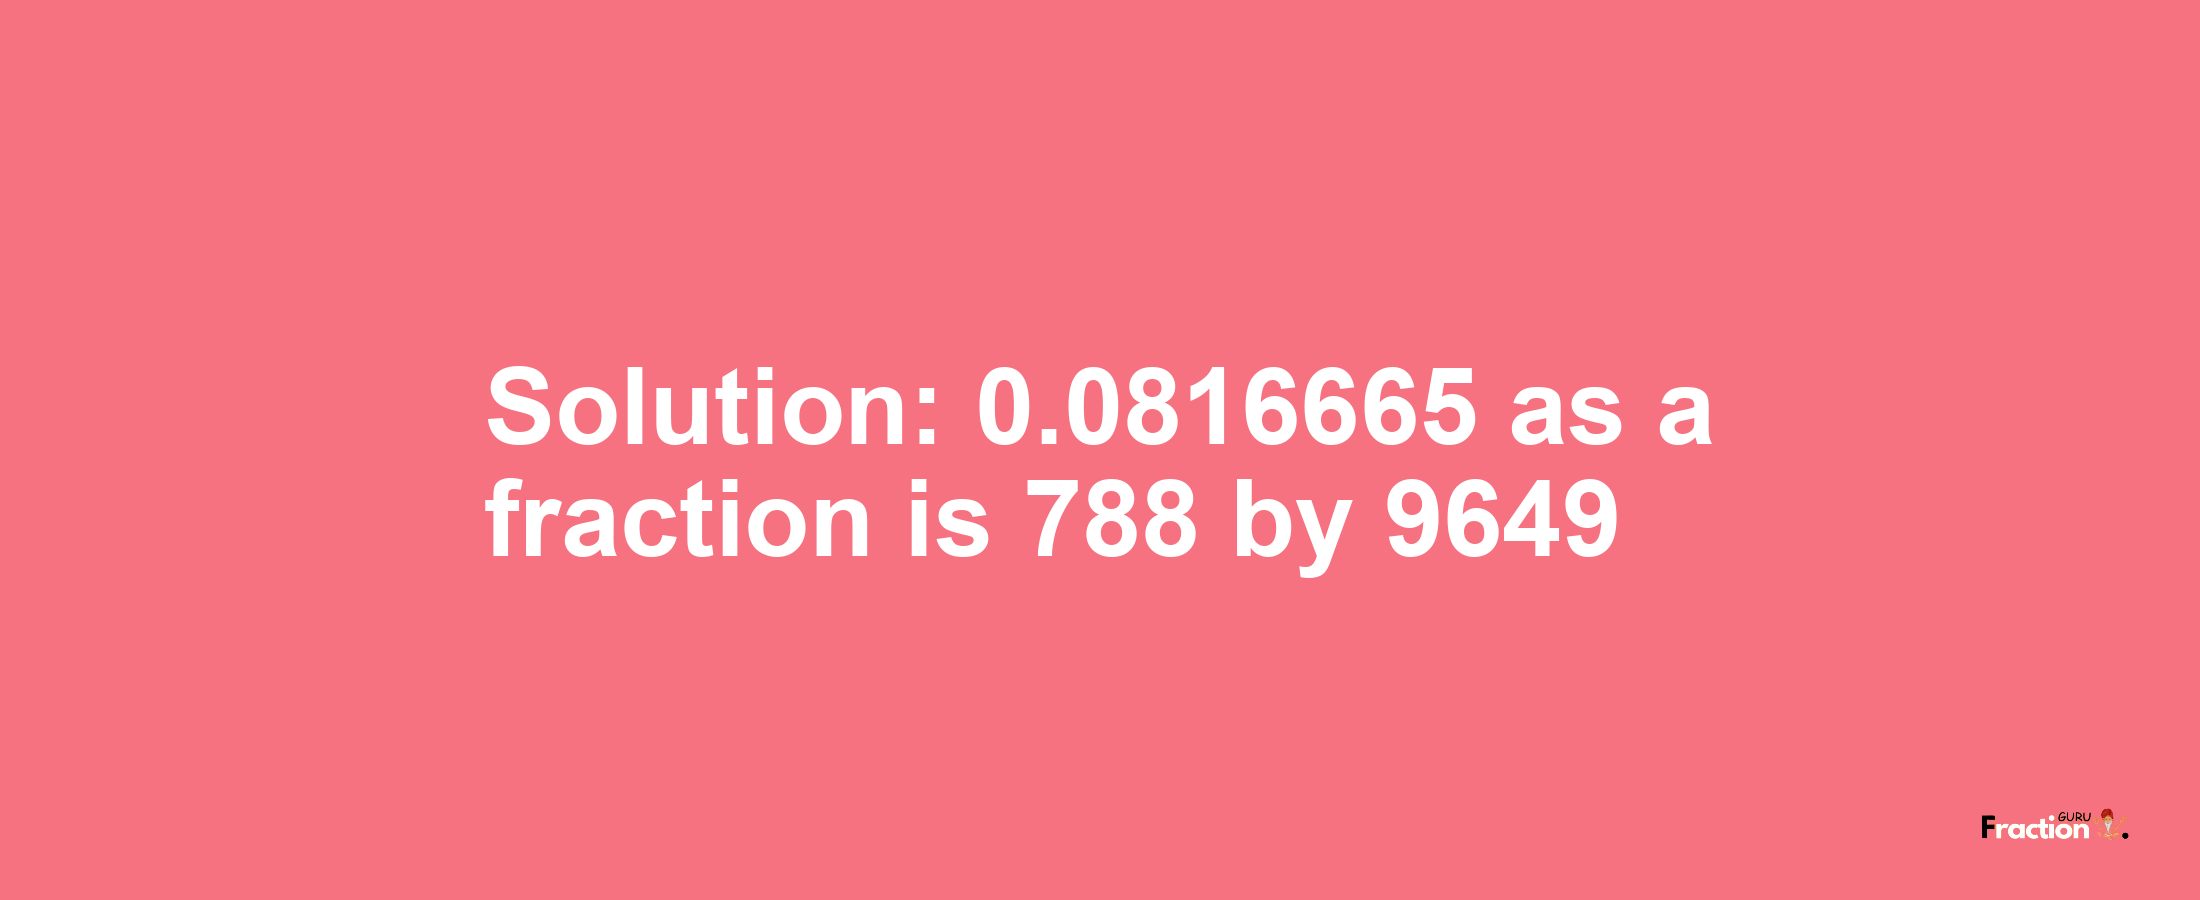 Solution:0.0816665 as a fraction is 788/9649